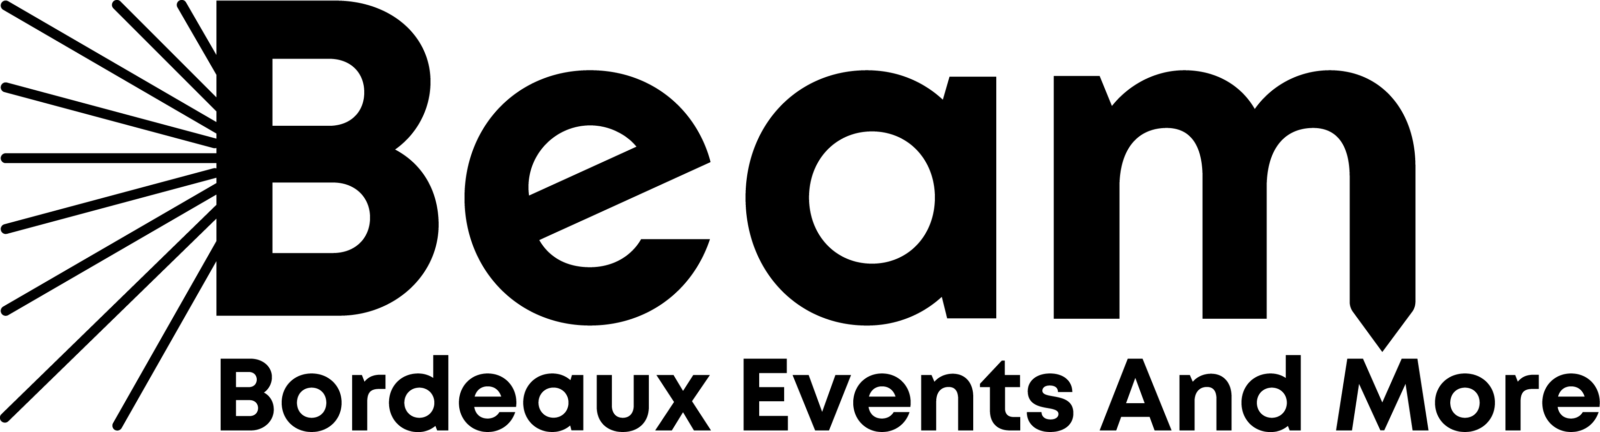 BEAM - Bordeaux Events And More